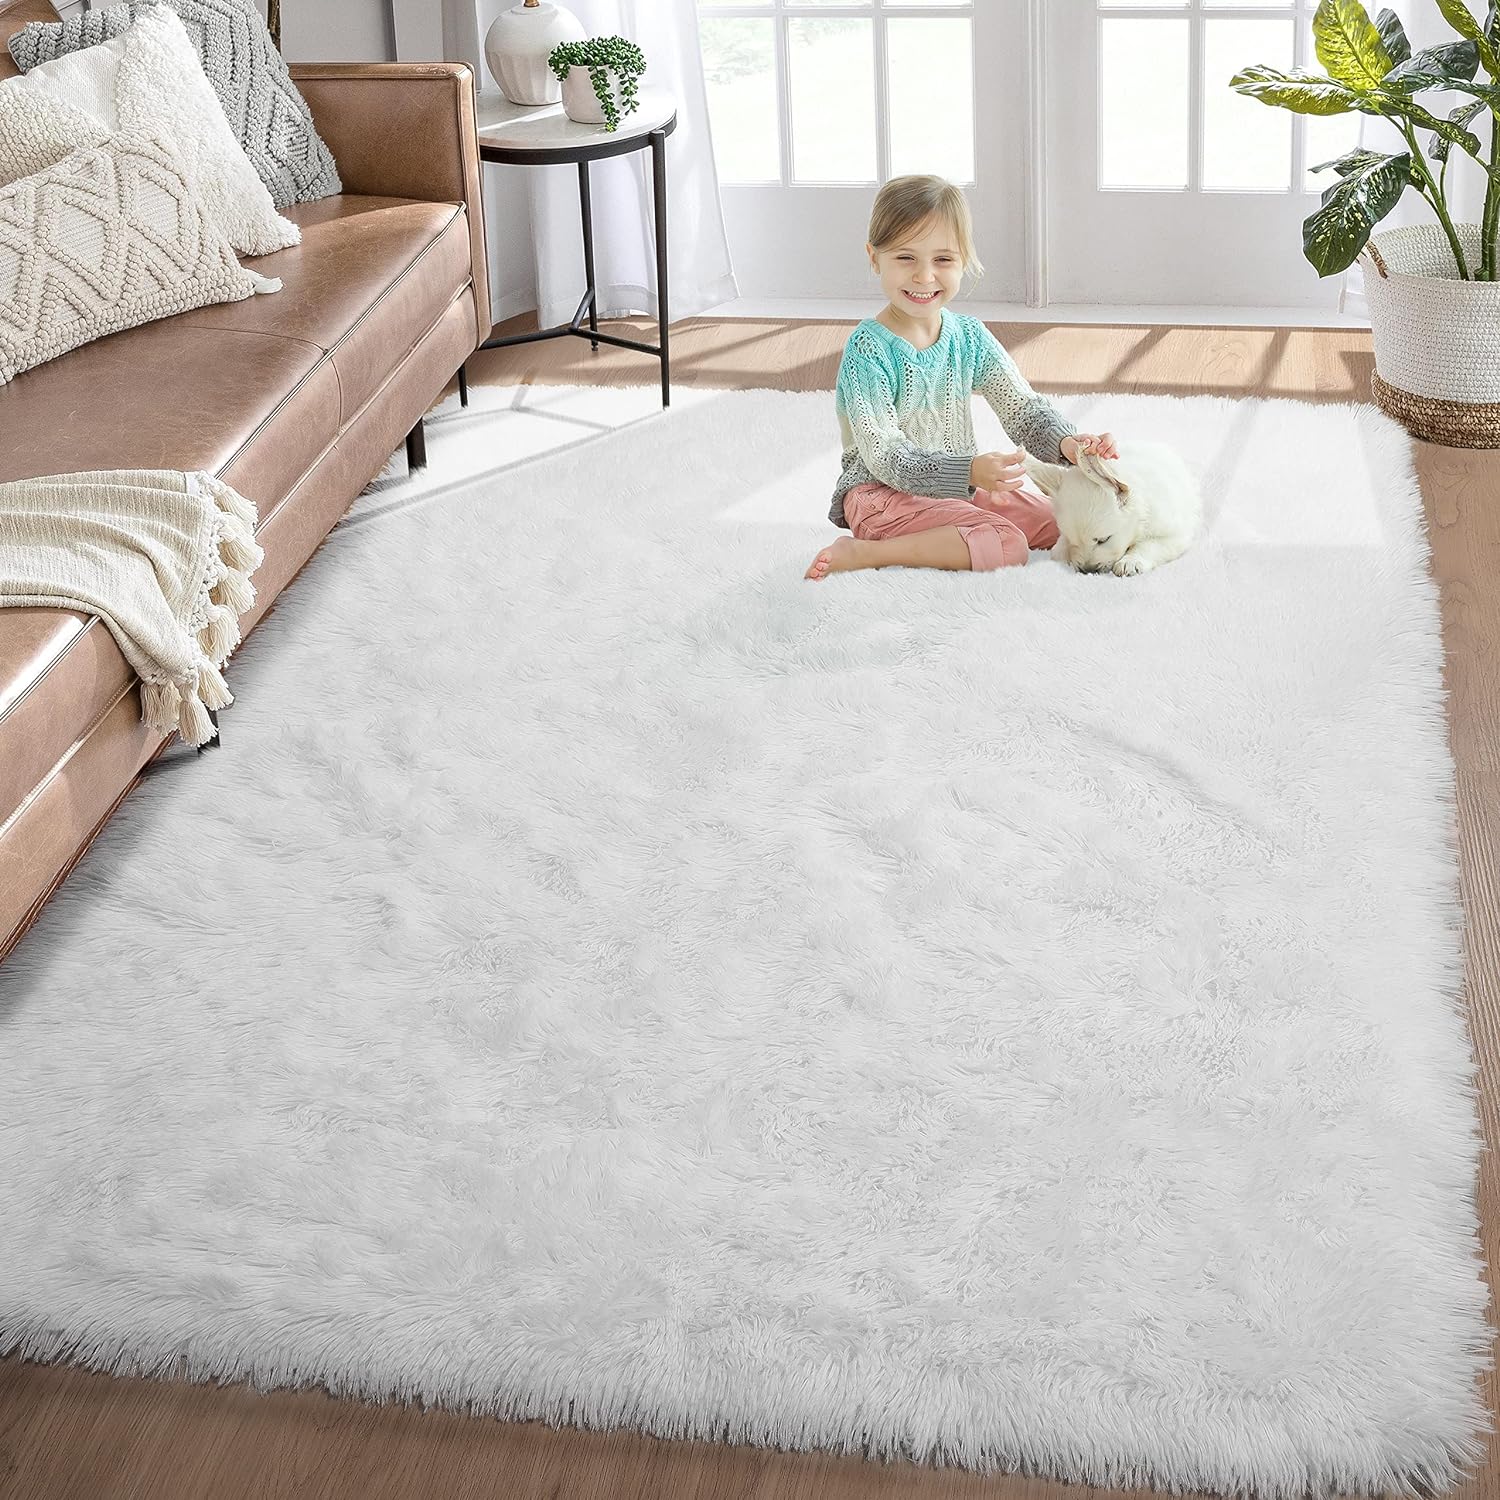 Thicken Fluffy Faux Fur Rug Area Rugs Hairy Soft Shaggy Home Carpet Floor Mats 